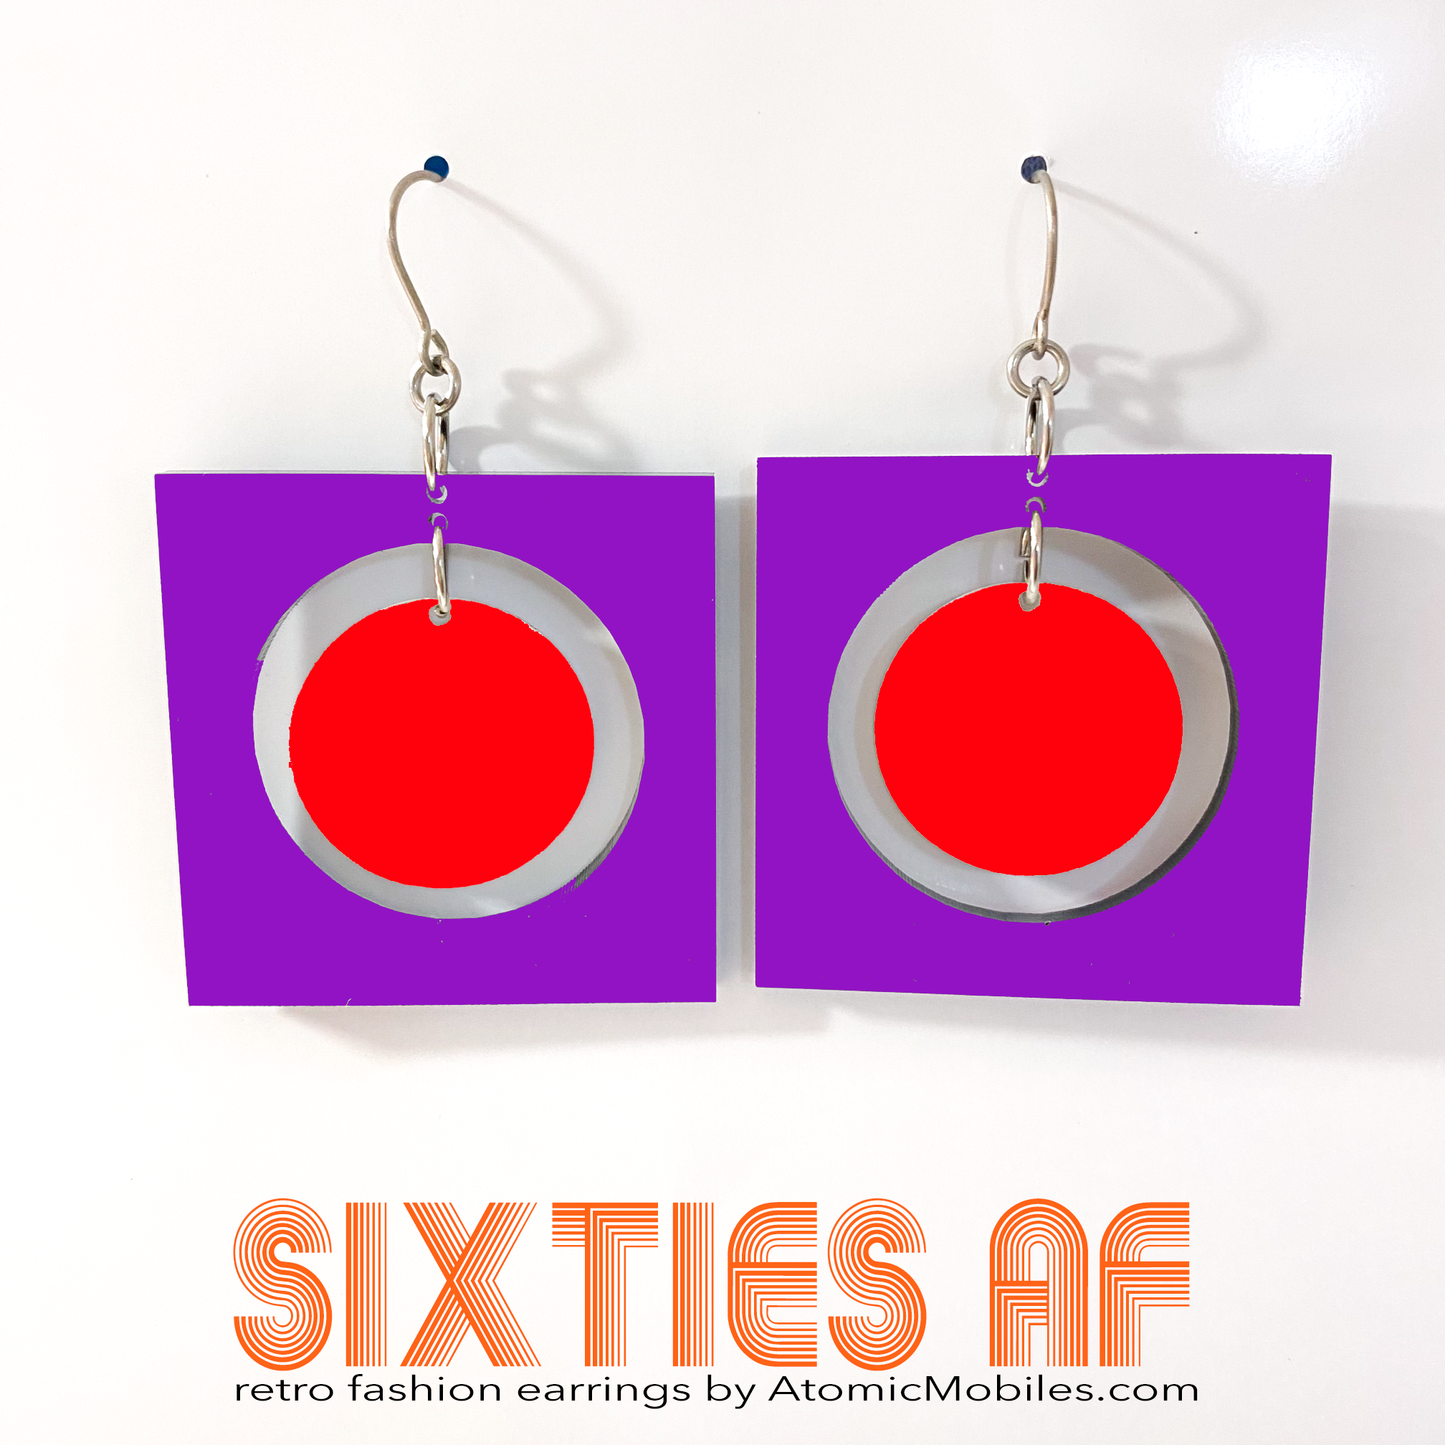 SIXTIES AF groovy retro fashion earrings inspired by the 1960s in purple and red - by AtomicMobiles.com